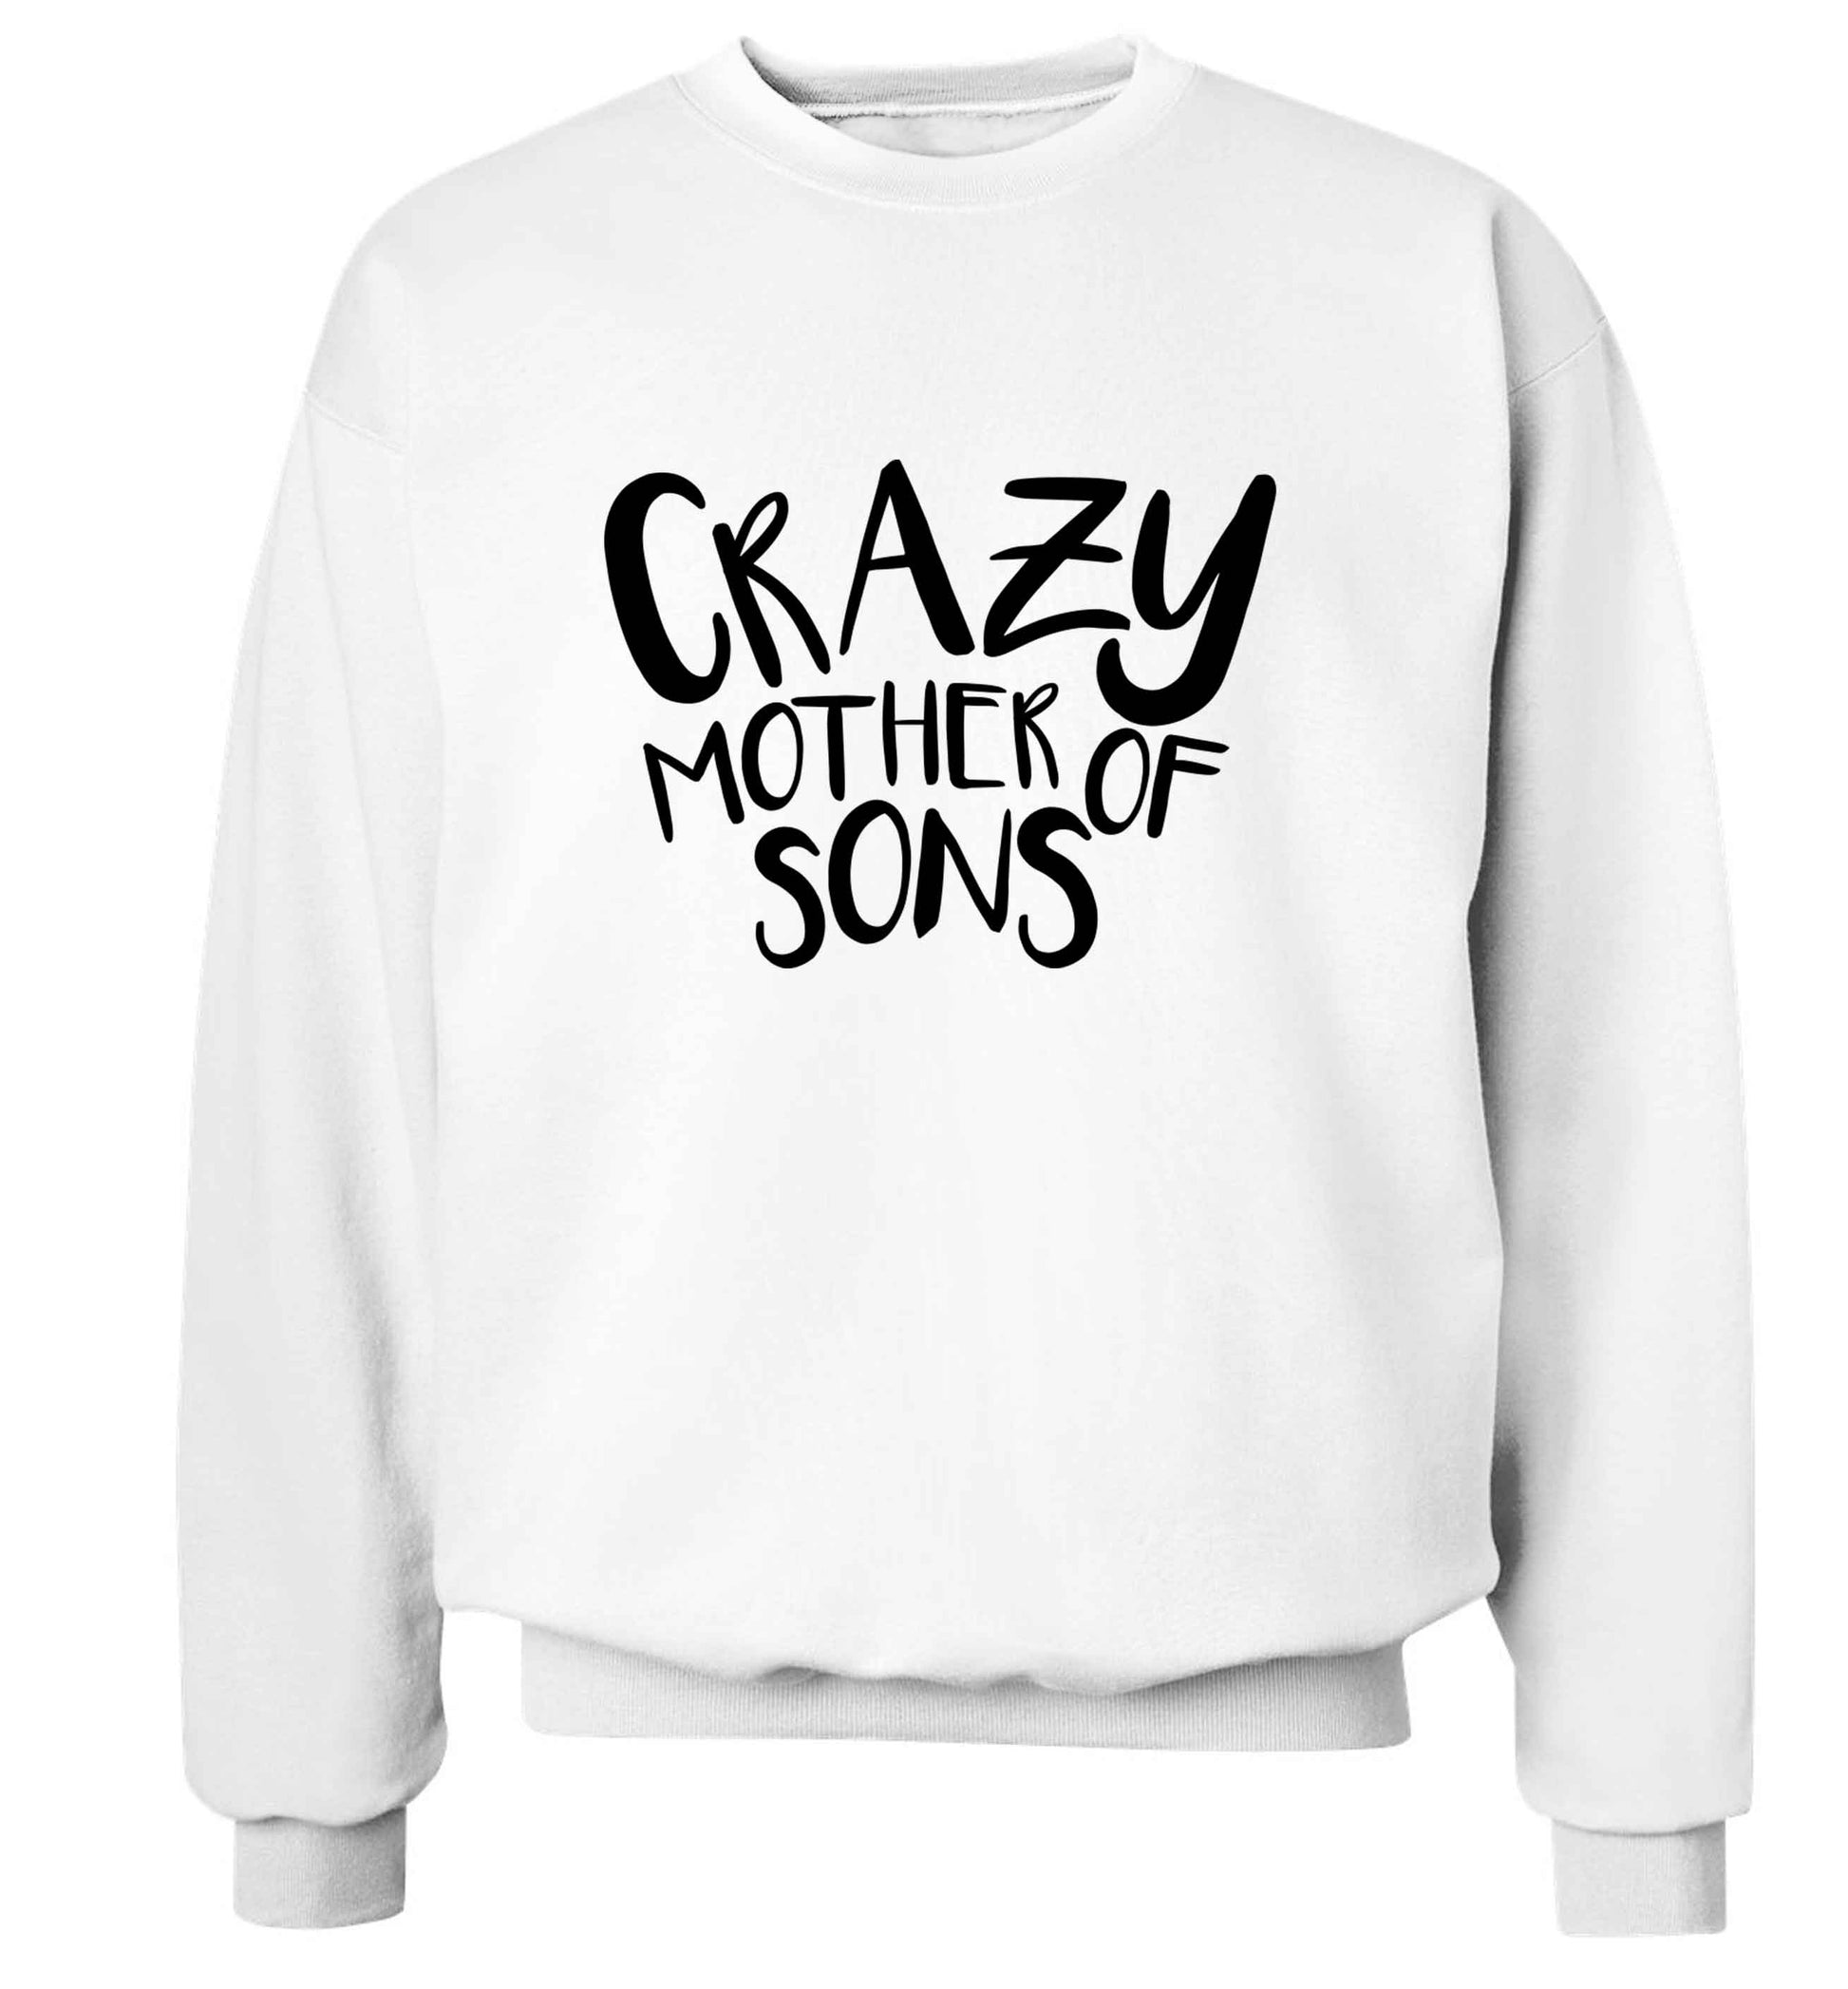 Crazy mother of sons adult's unisex white sweater 2XL